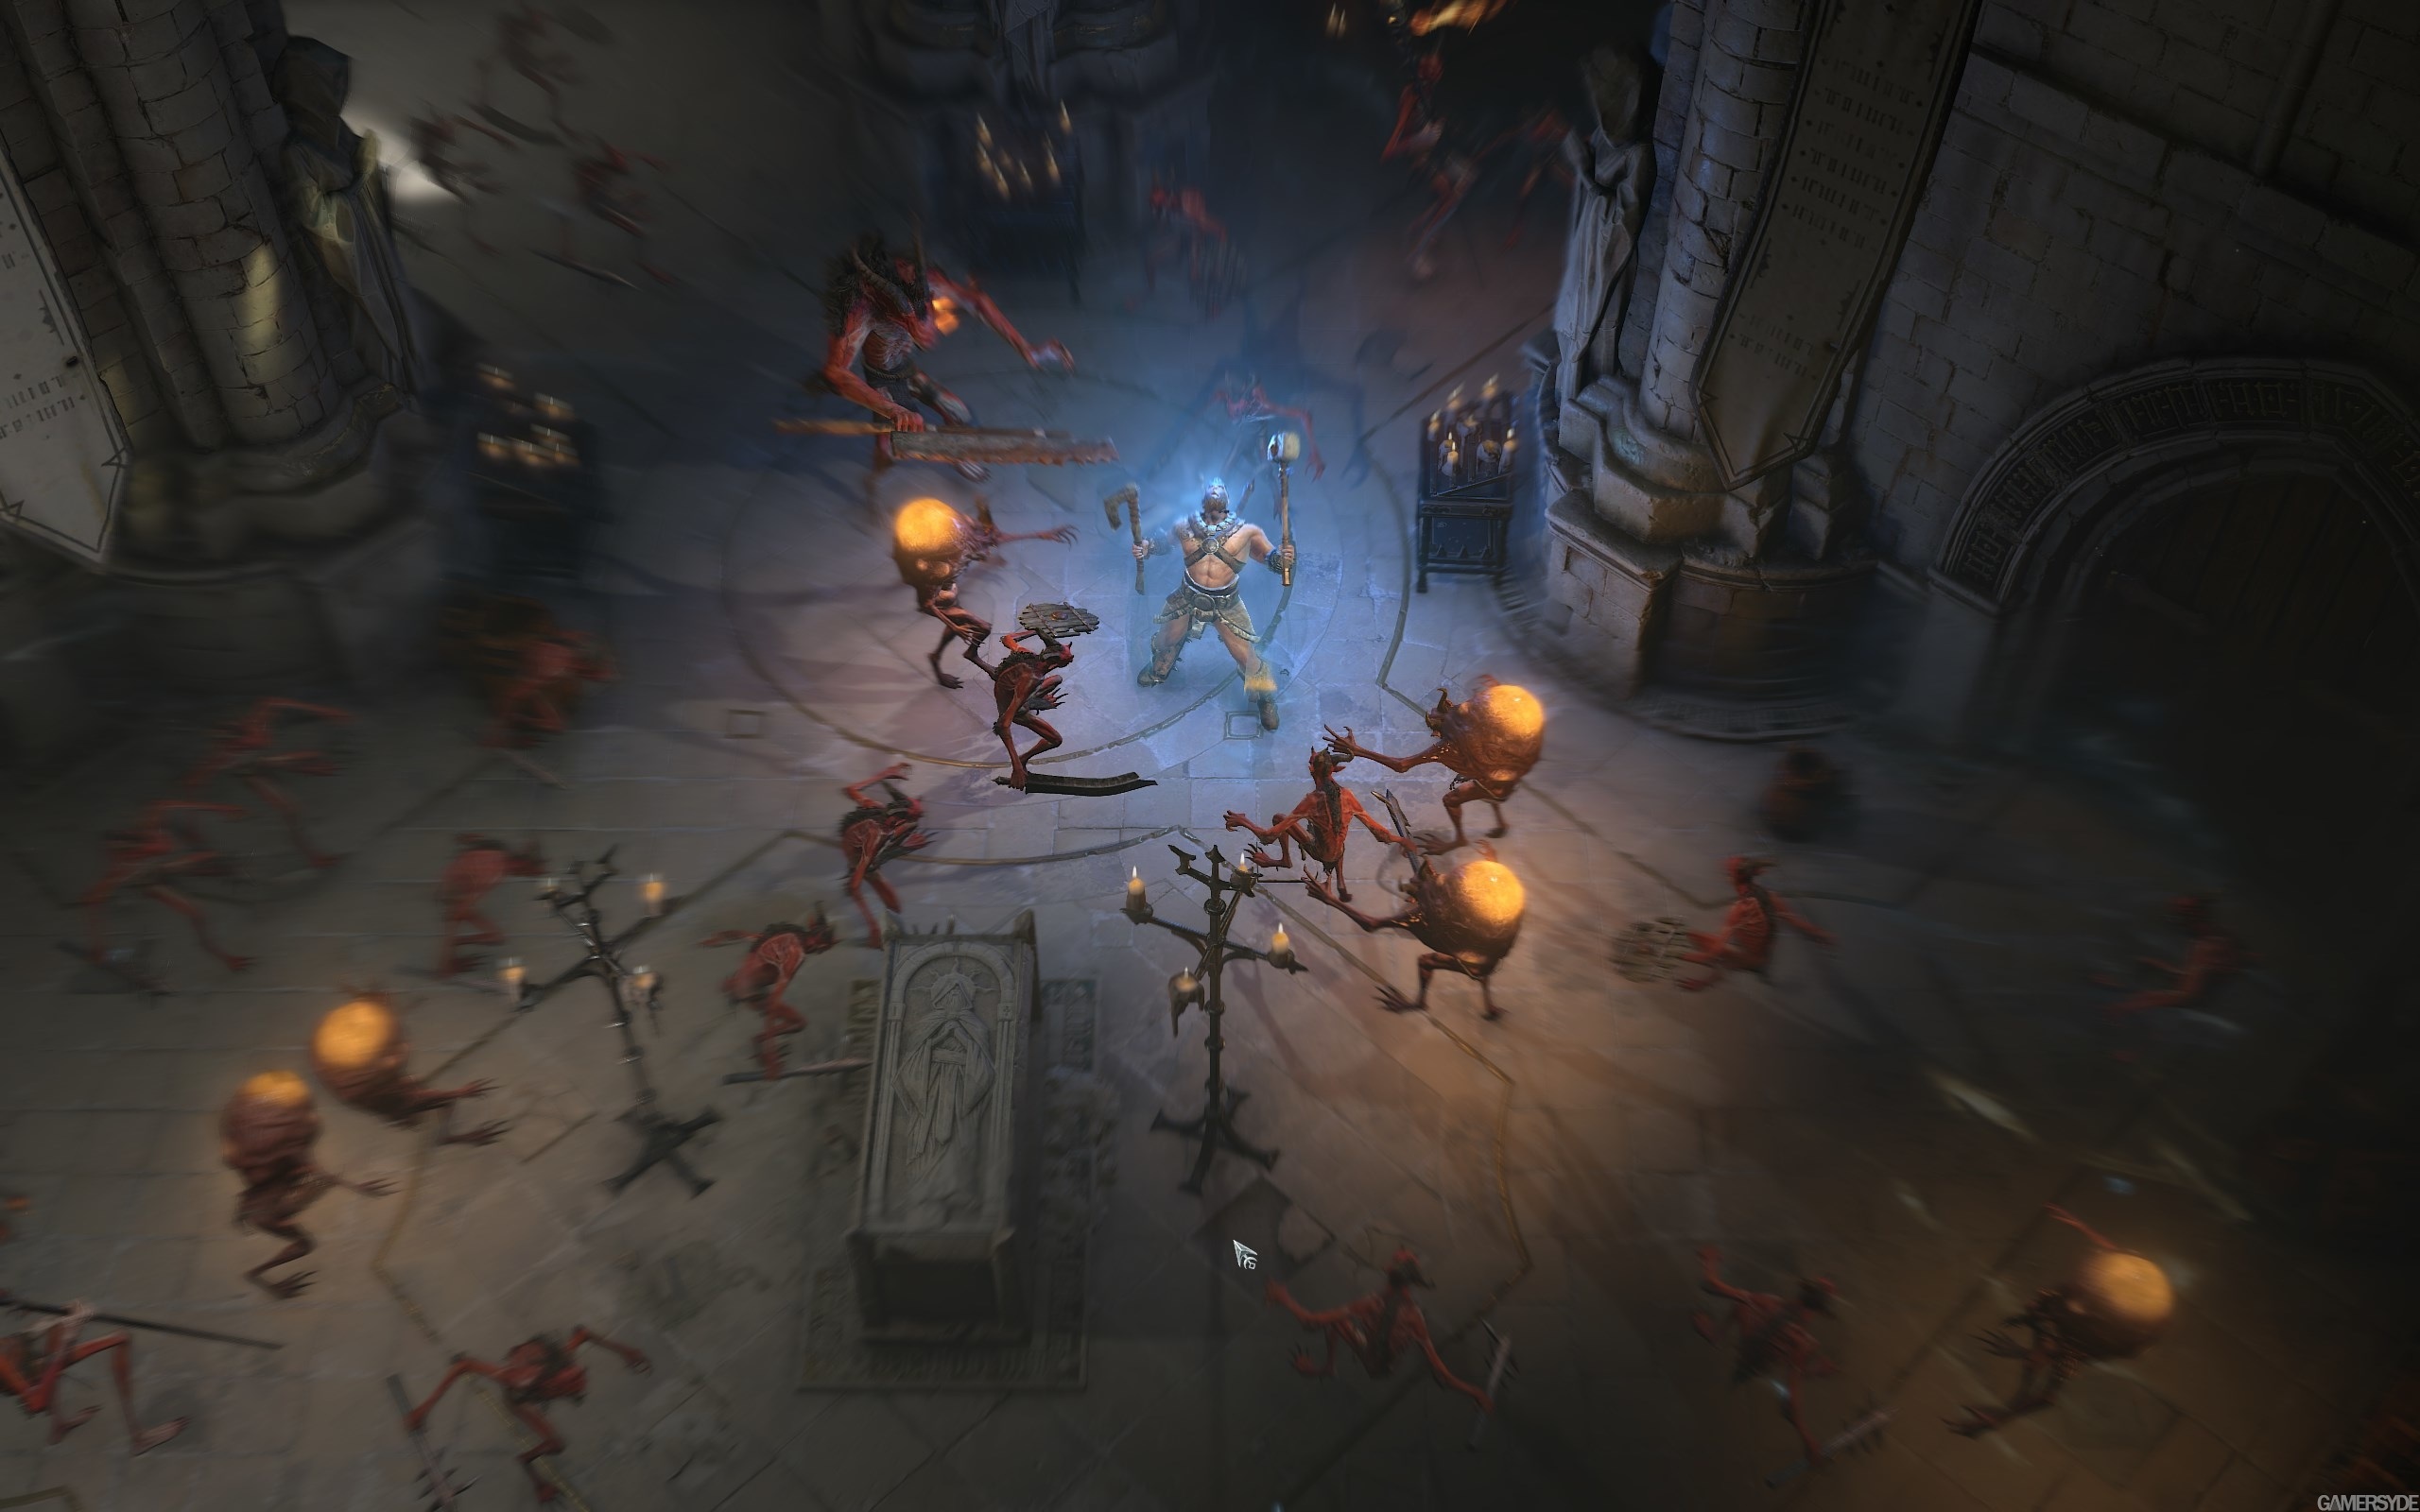 diablo iv announce cinematic | by three they come cast